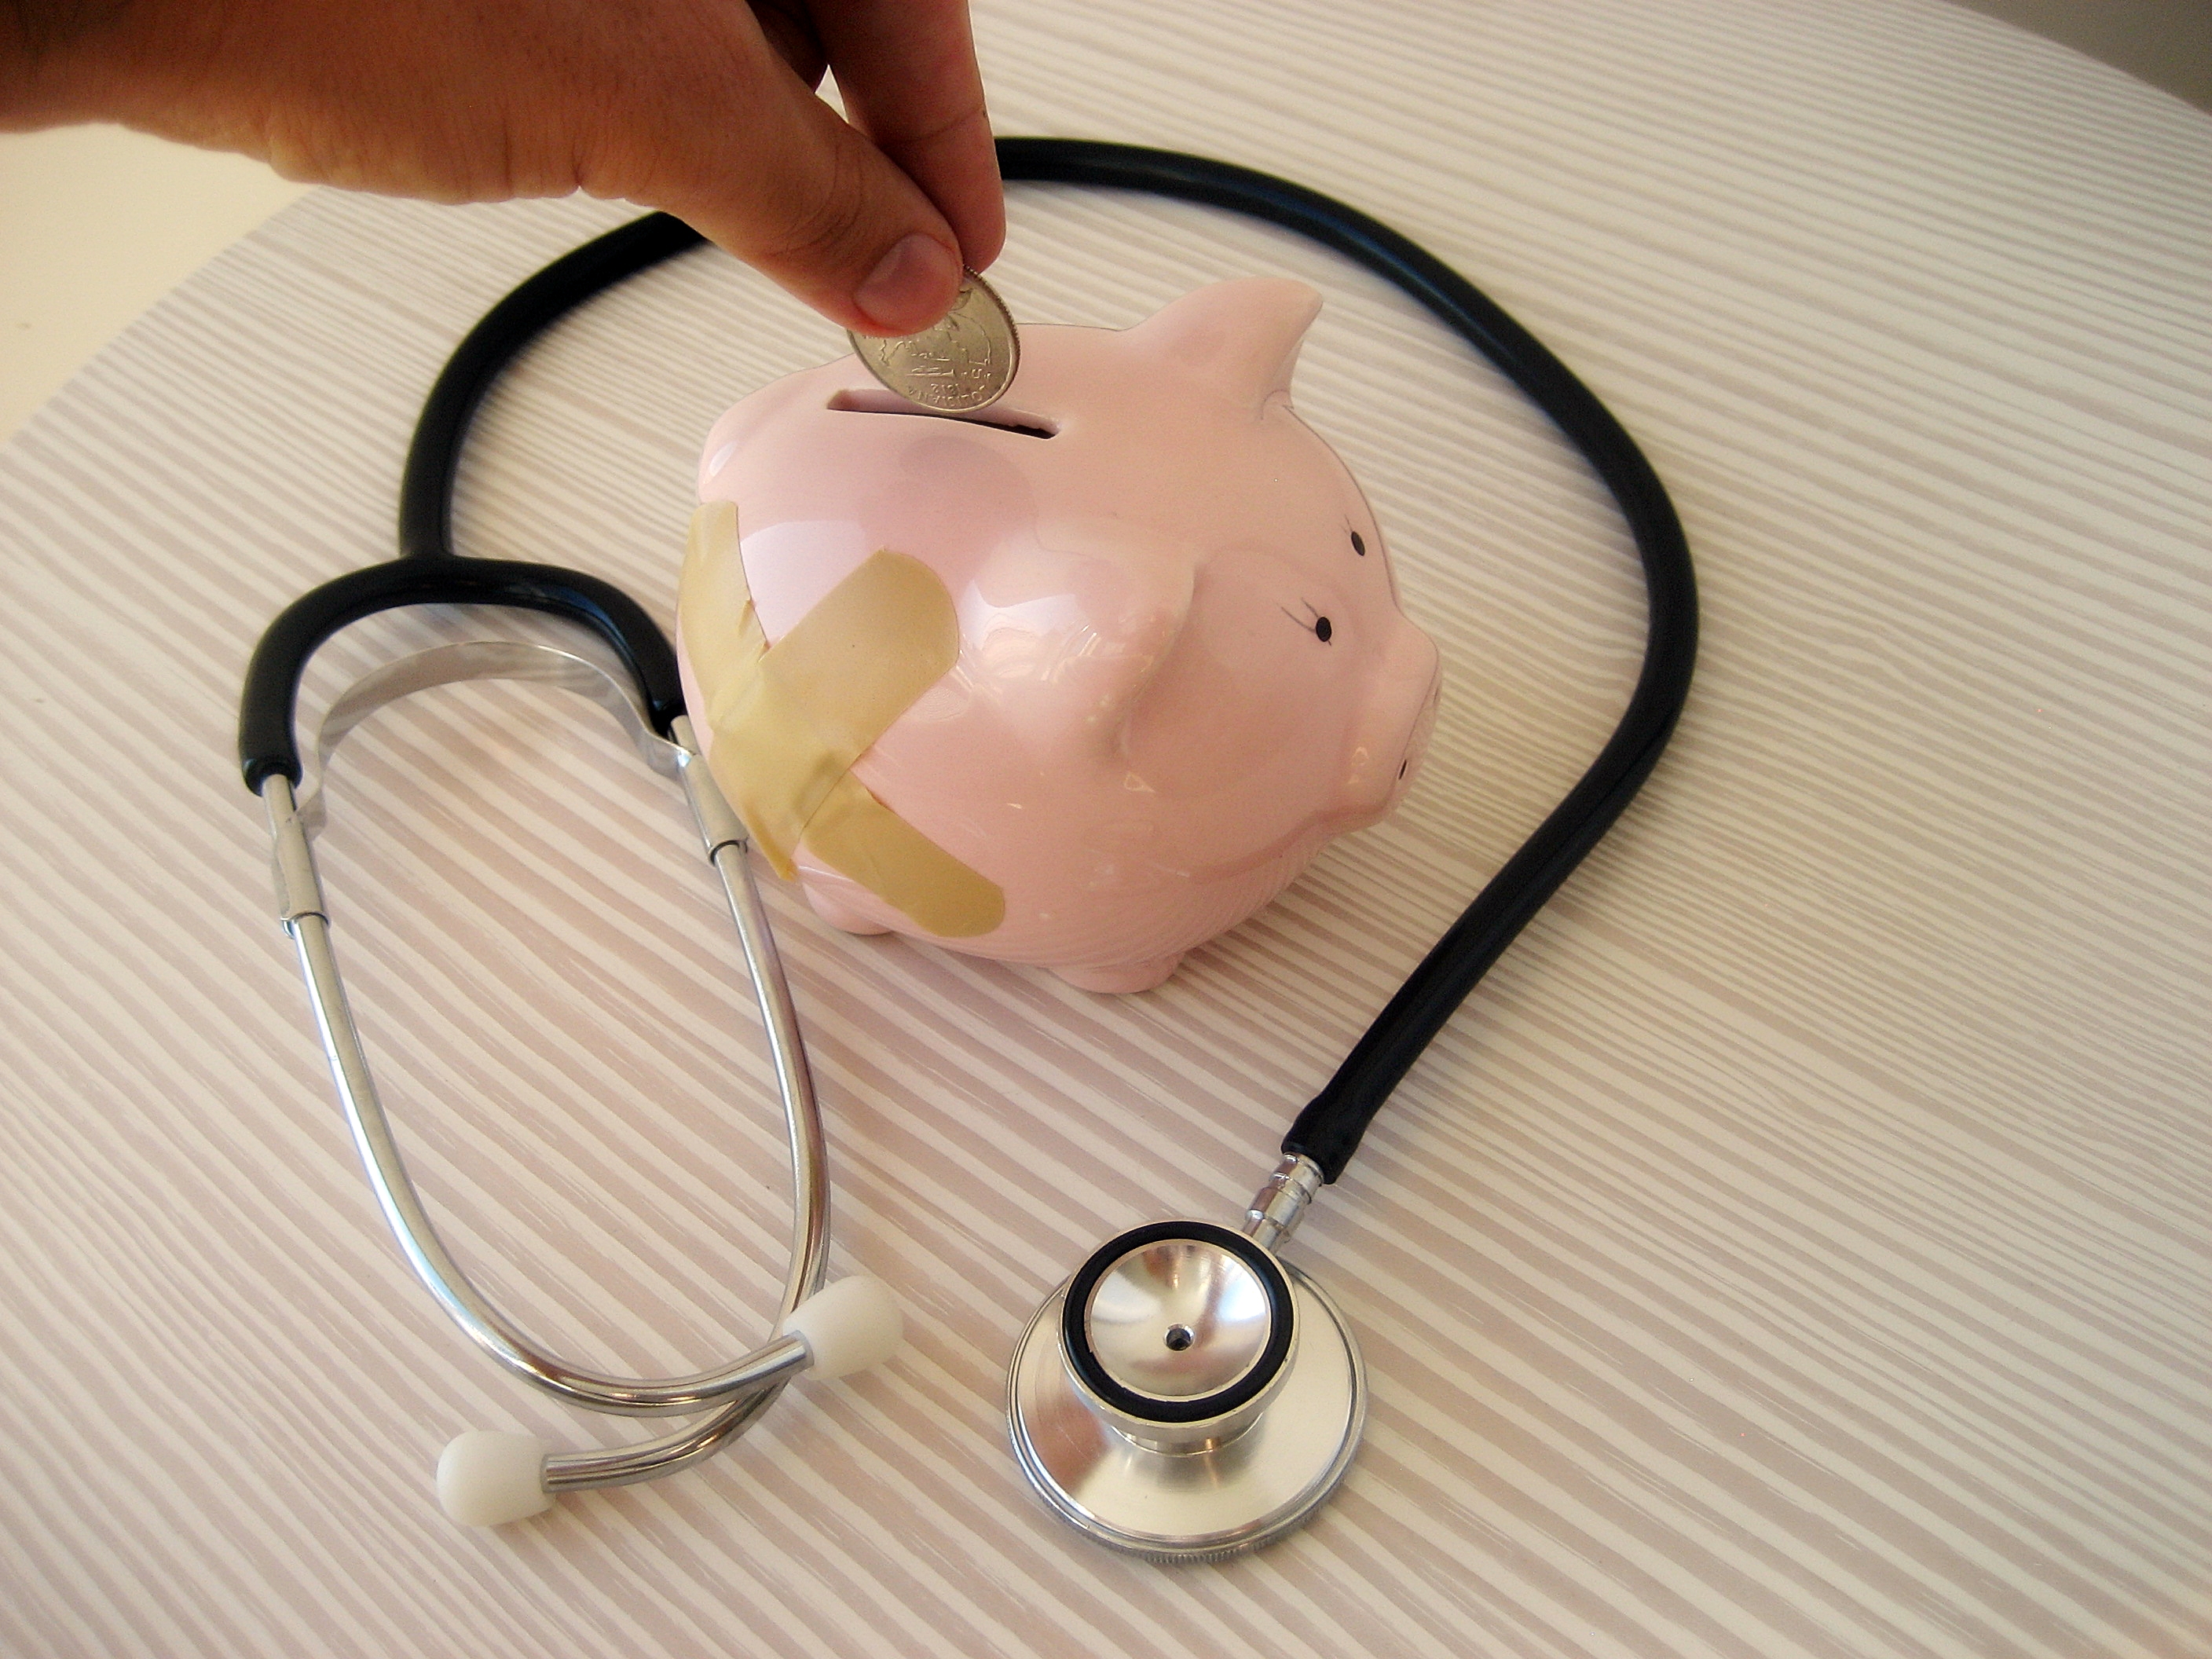 Someone puts a coin into a piggy bank that has bandages on its side. A doctor's stethoscope surrounds the piggy bank. 